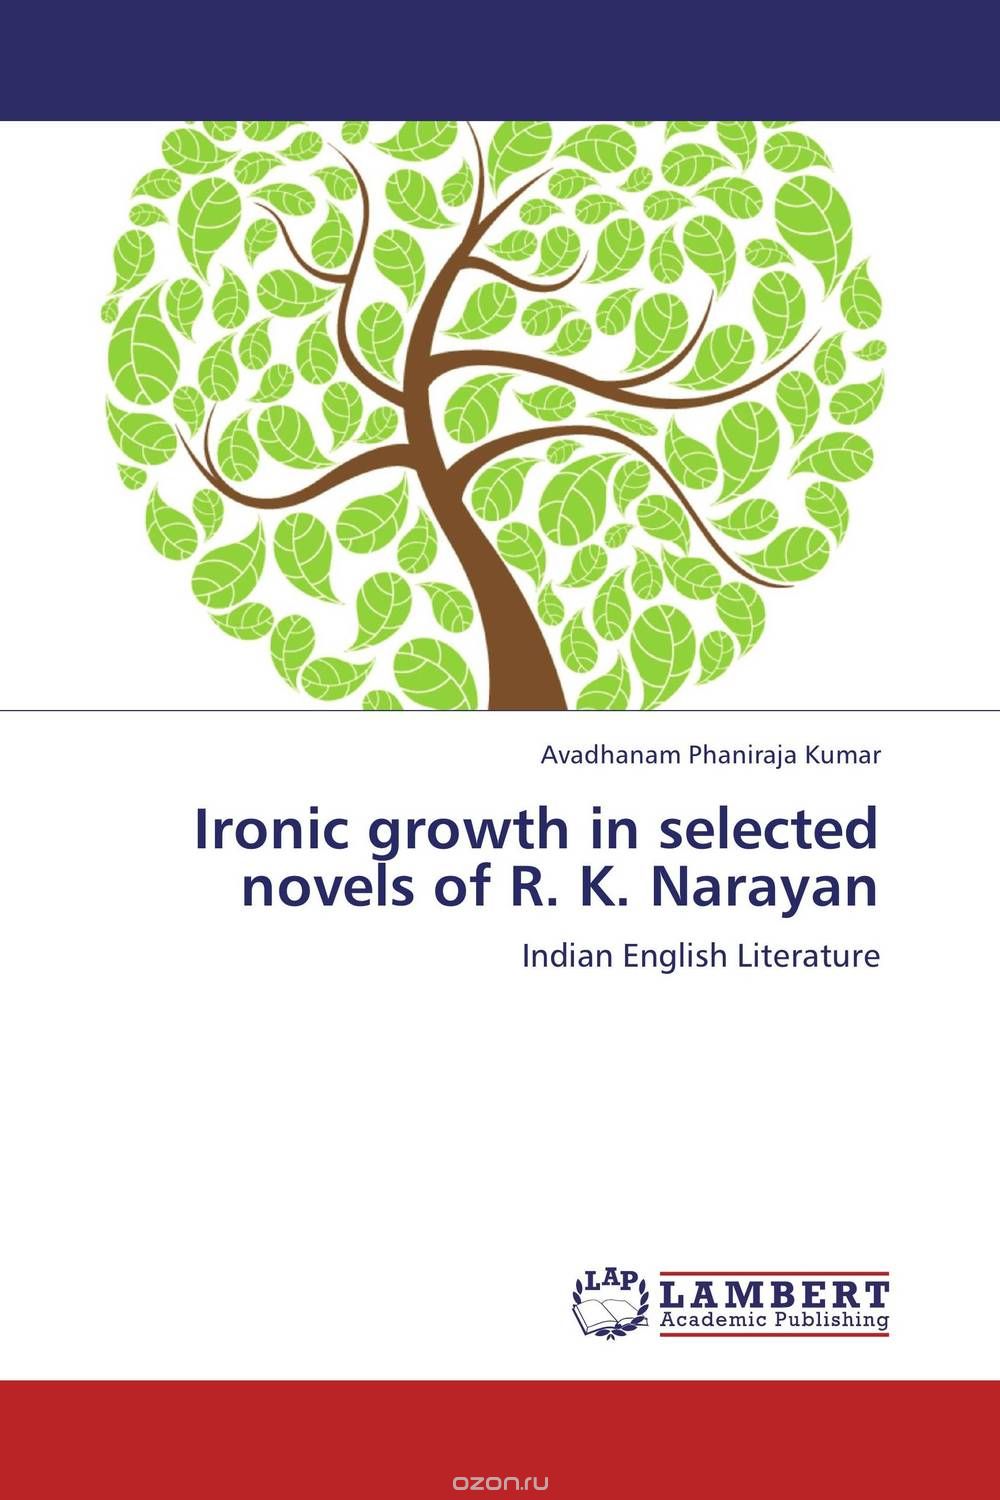 Ironic growth in selected novels of R. K. Narayan